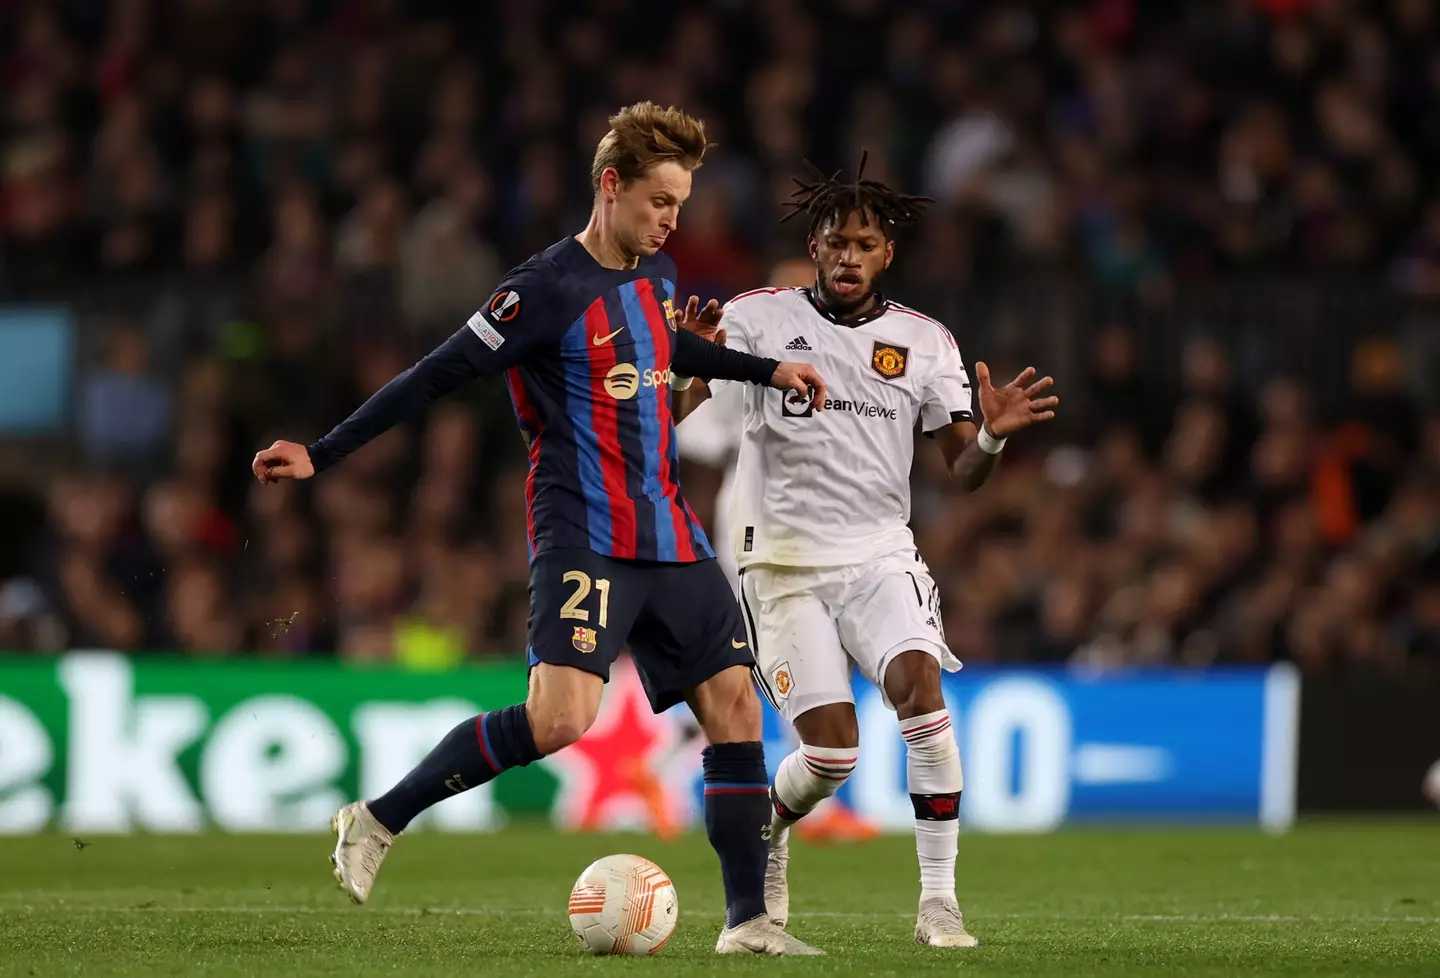 Frenkie de Jong played for Barcelona against United in this season's Europa League, getting knocked out 4-3 on aggregate in the round of 32. (